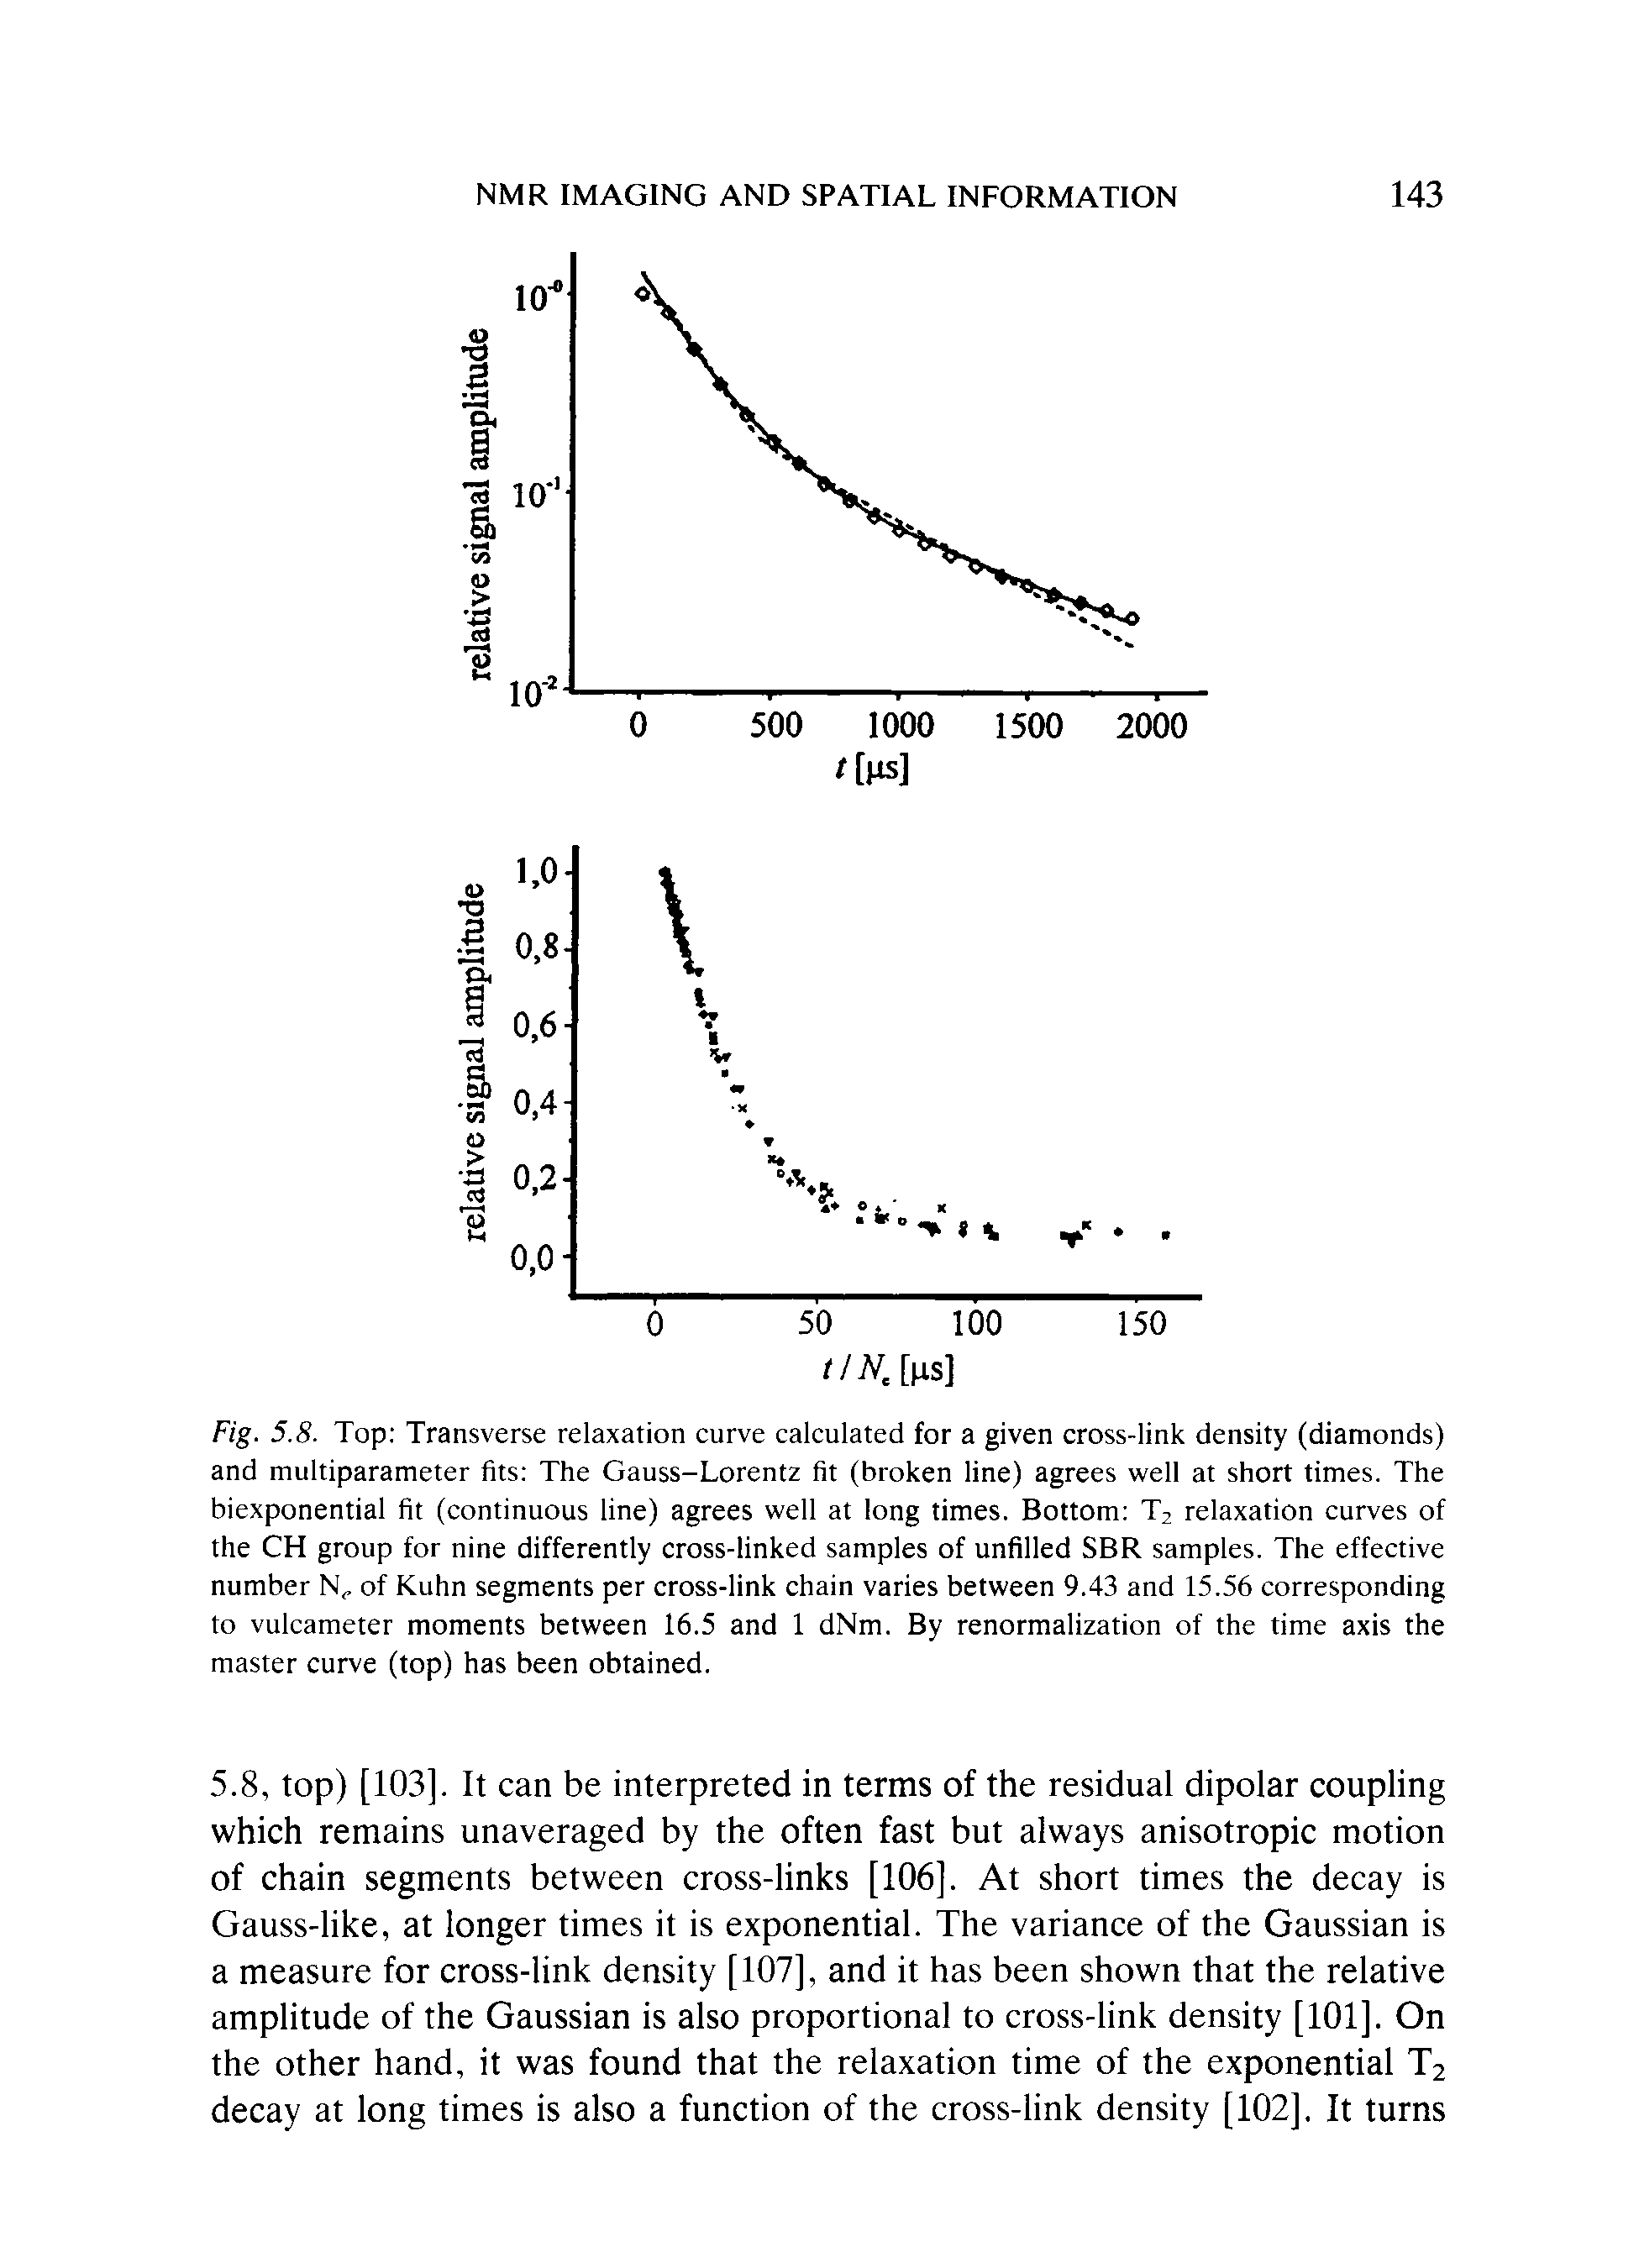 Fig. 5.8. Top Transverse relaxation curve calculated for a given cross-link density (diamonds) and multiparameter fits The Gauss-Lorentz fit (broken line) agrees well at short times. The biexponential fit (continuous line) agrees well at long times. Bottom T2 relaxation curves of the CH group for nine differently cross-linked samples of unfilled SBR samples. The effective number N,. of Kuhn segments per cross-link chain varies between 9.43 and 15.56 corresponding to vulcameter moments between 16.5 and 1 dNm. By renormalization of the time axis the master curve (top) has been obtained.